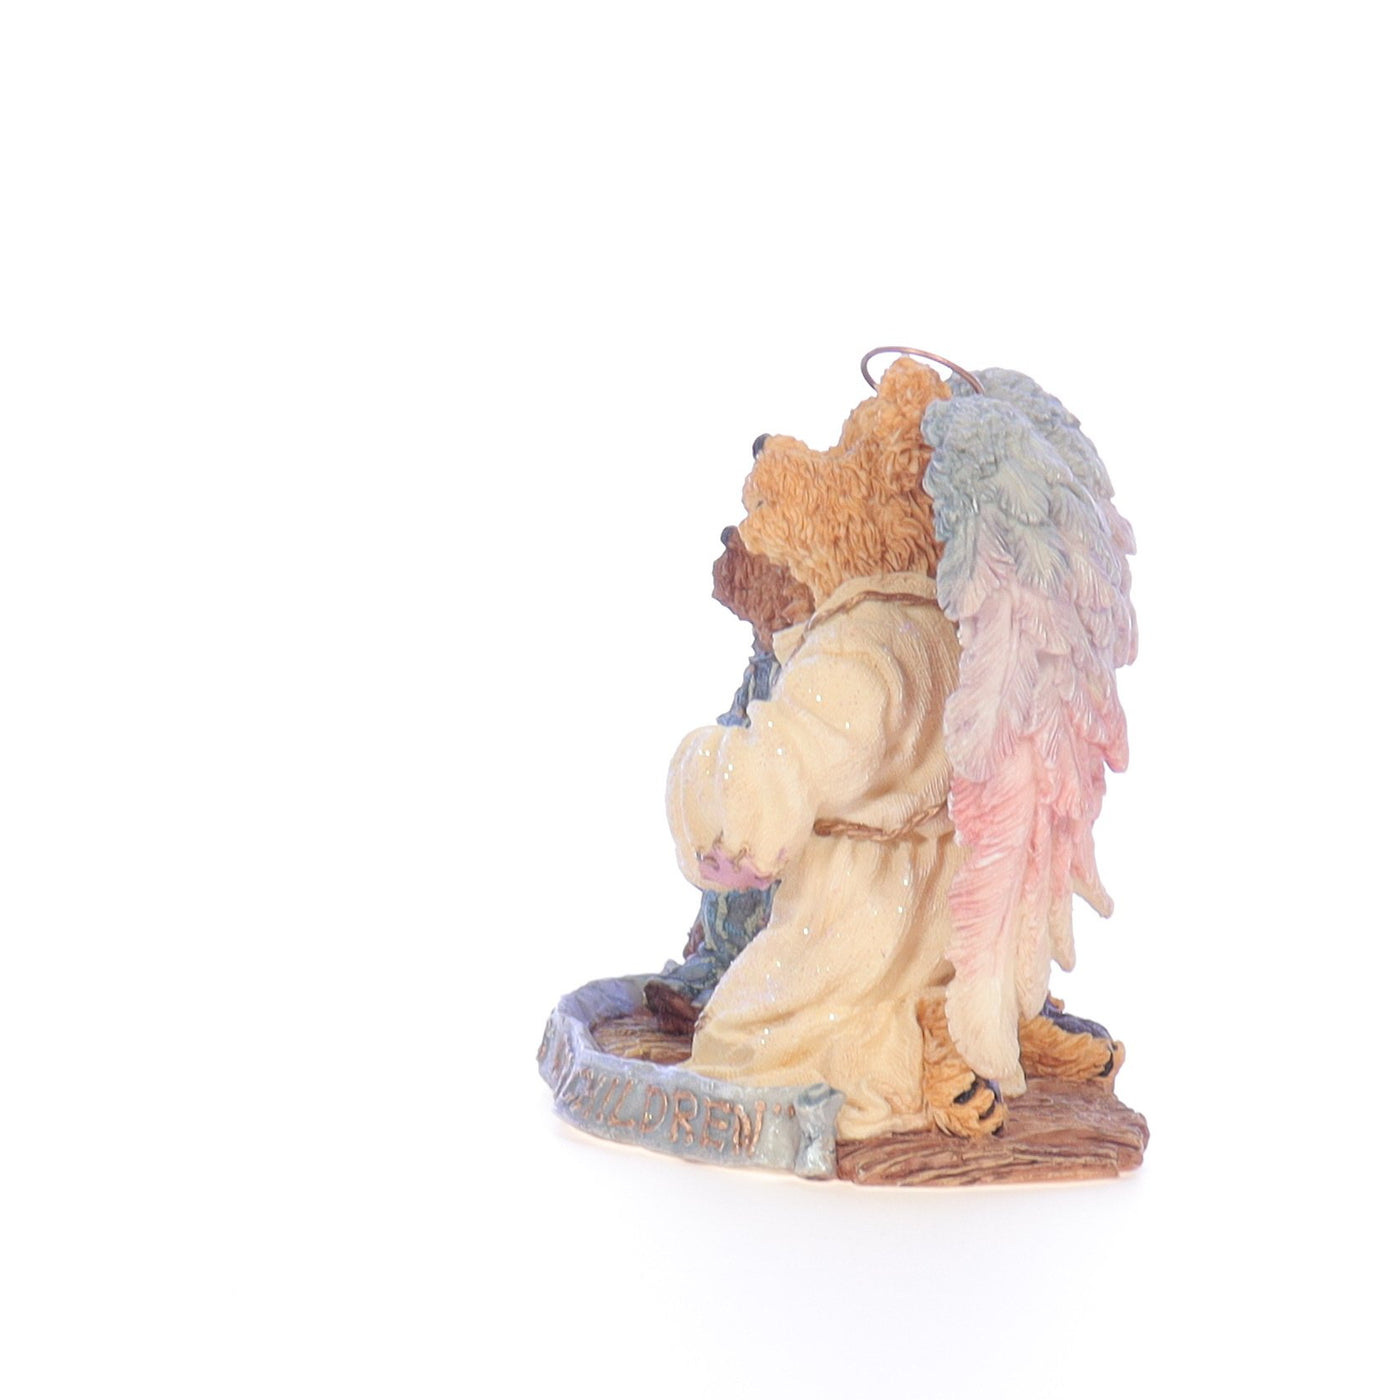 Boyds_Bears_Bearstone_Resin_Figurine_Hope_Angelwish_Everychild_Bless_Our_Children_228361_03